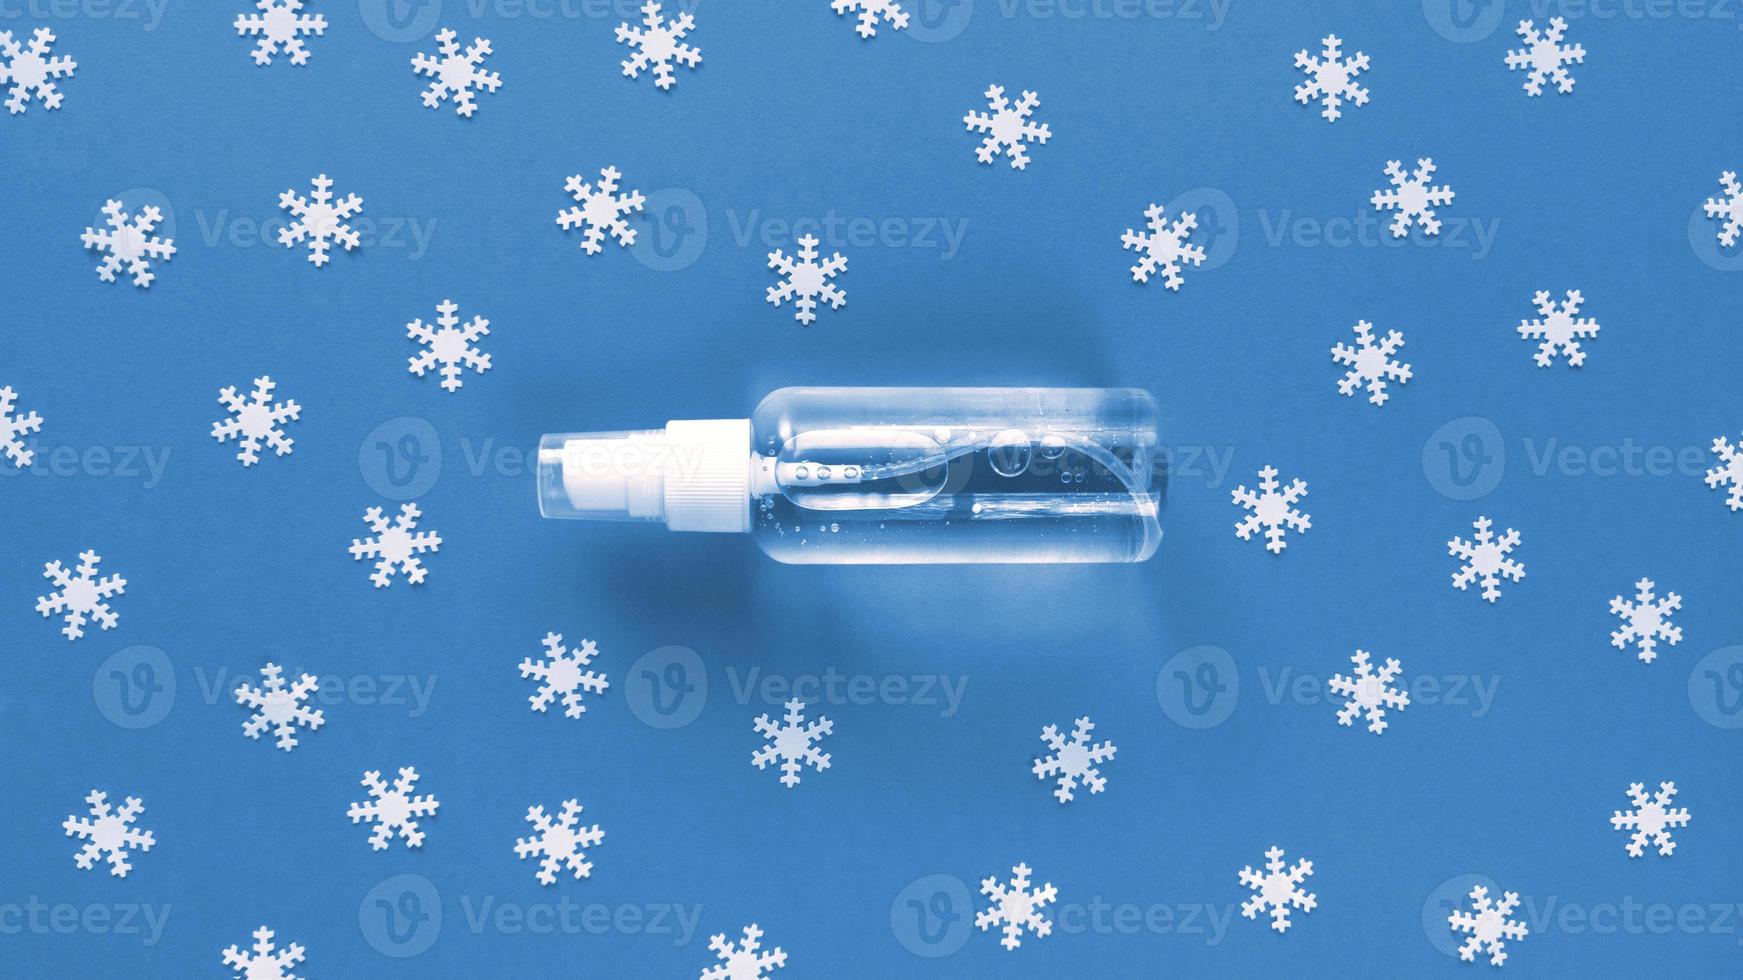 Hand sanitizer transparent bottle with spray cap at the middle of blue background and scattered white snowflakes on it. Simple festive flat lay with pastel paper texture. Medical concept. Stock photo. photo